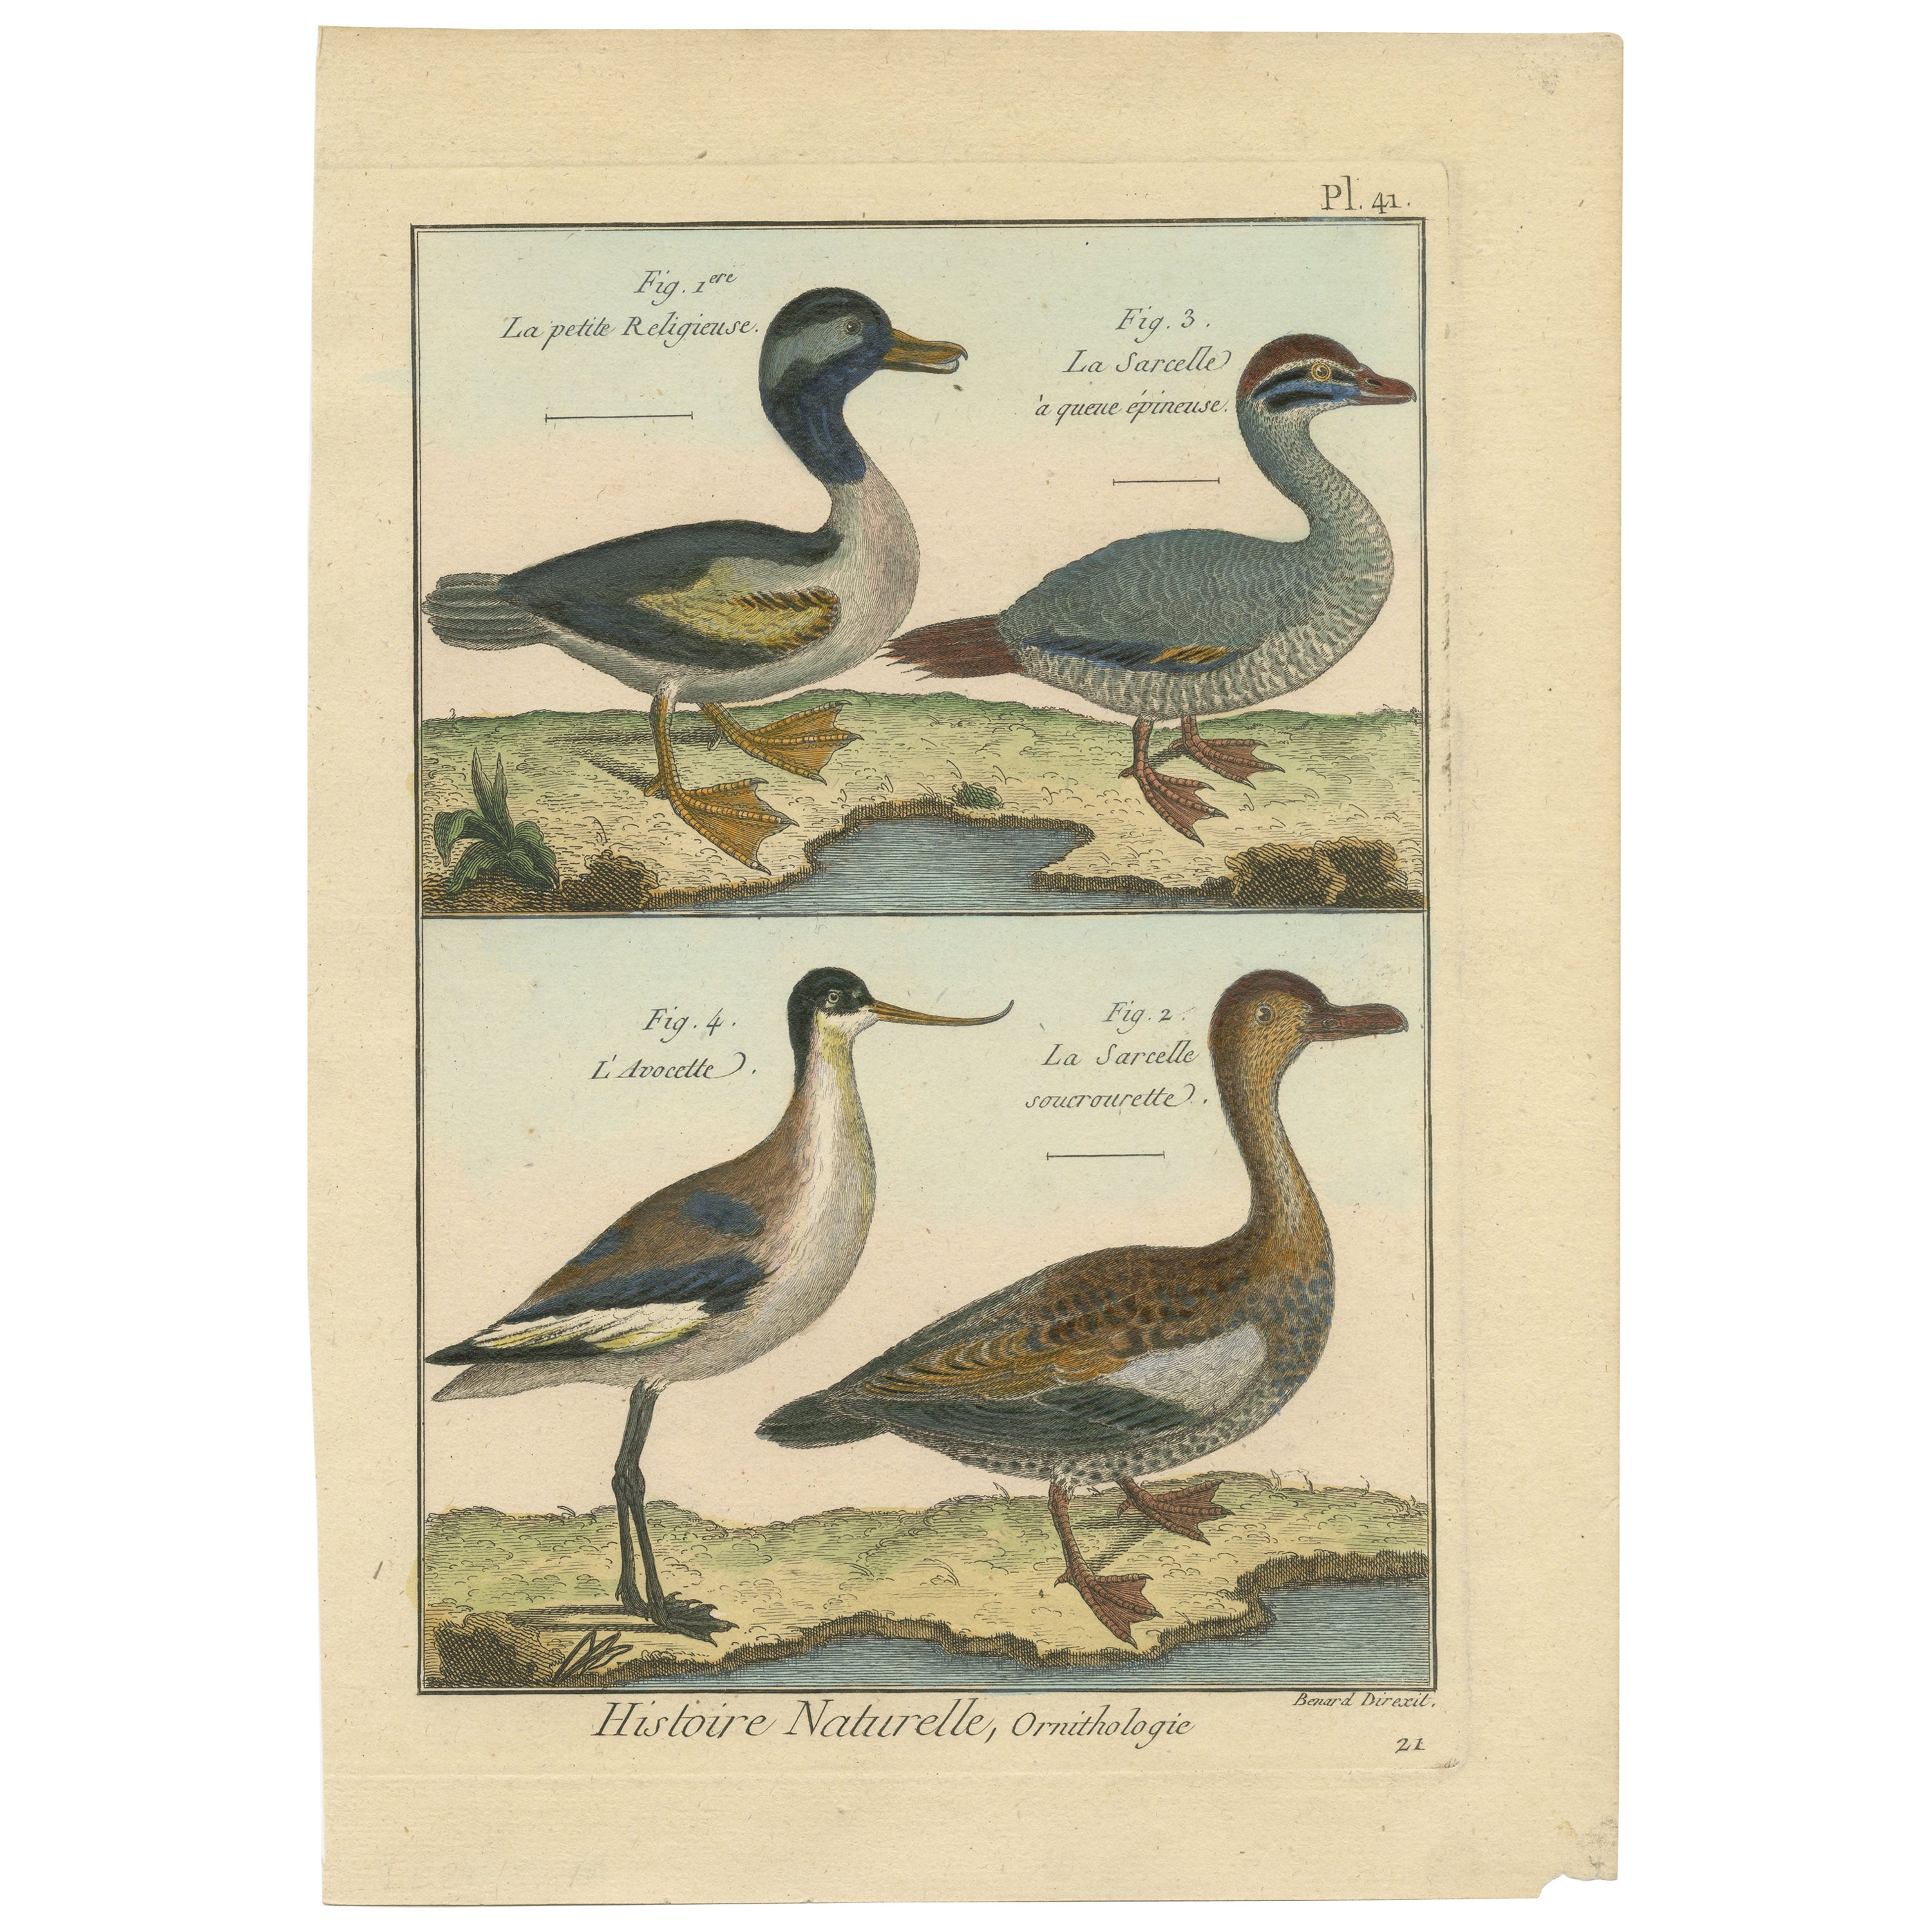 Beautiful, Hand-Colored, Rare Copper Engraving of 3 Ducks and An Avocet (1792).